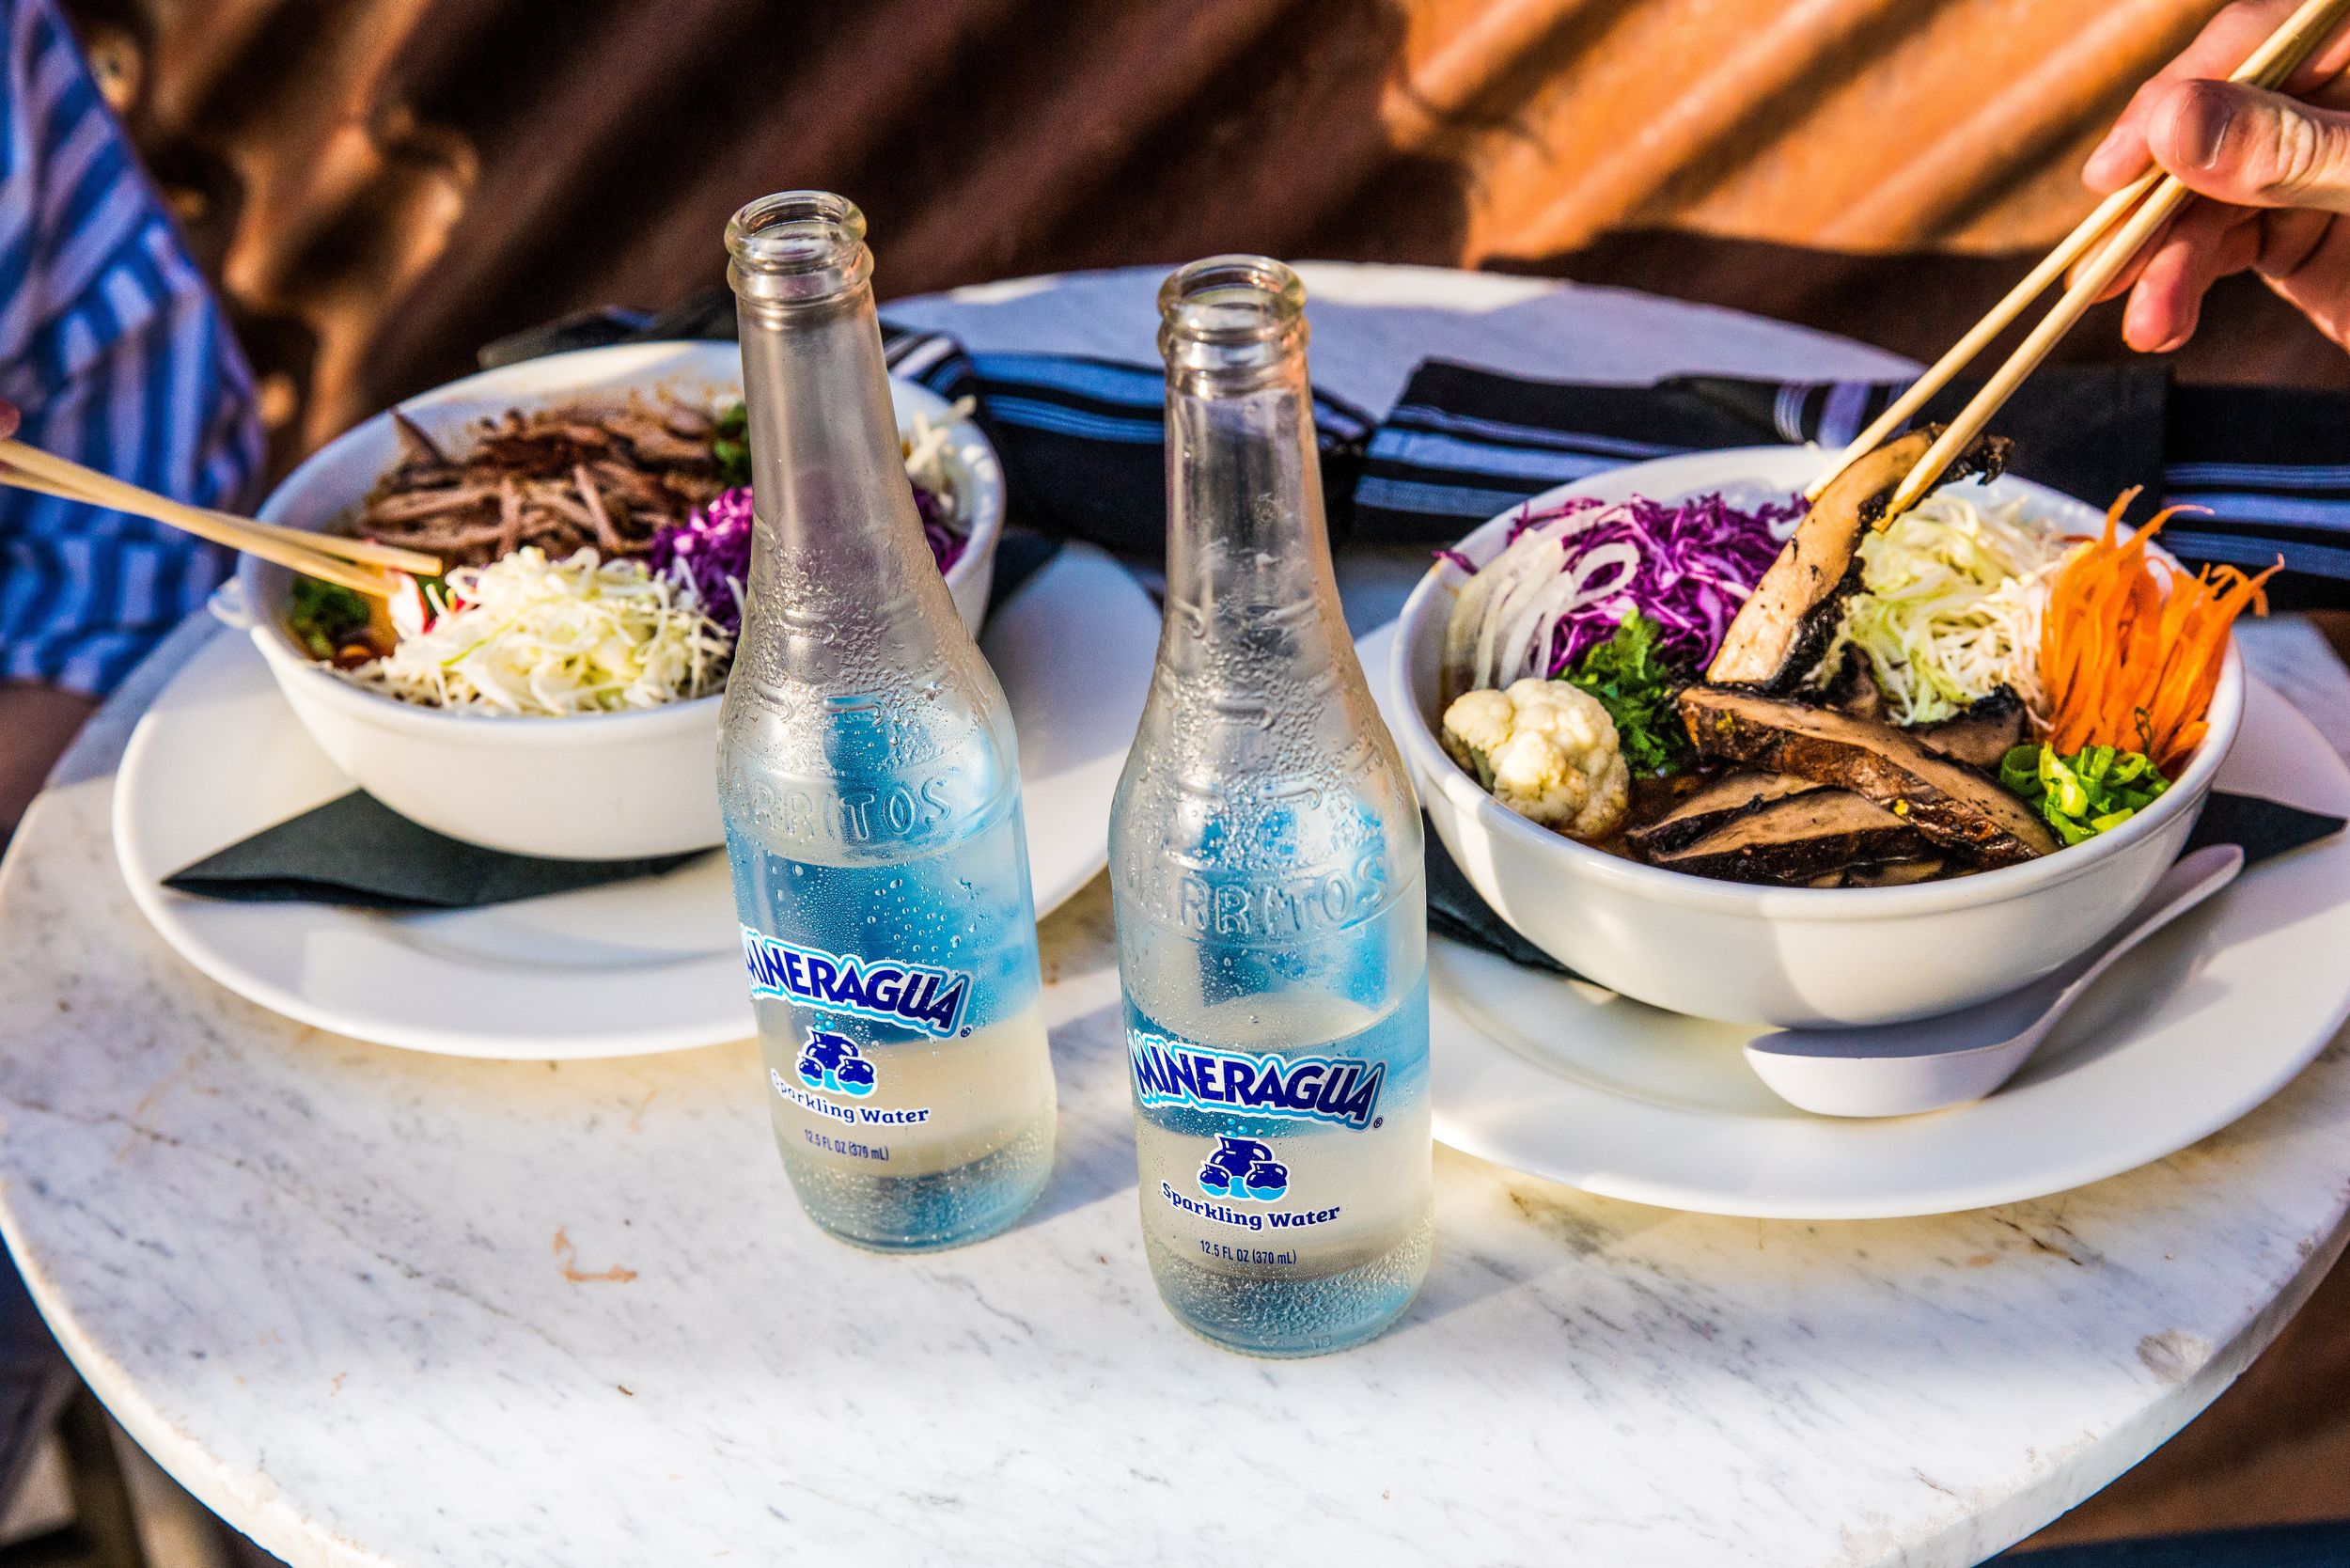 Two Mineragua waters on a table next to colorful and fresh salads